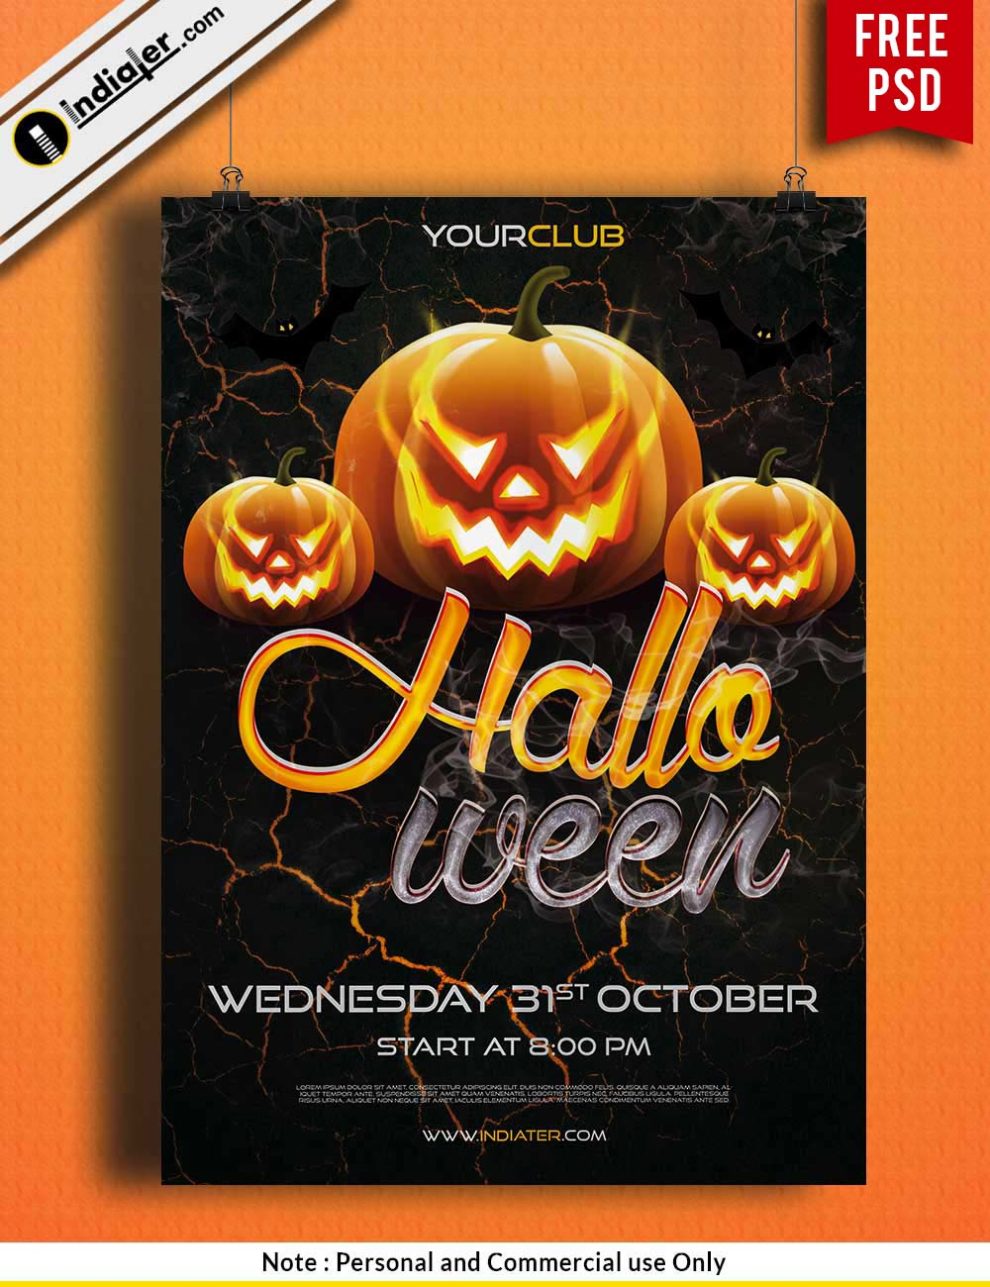 free-halloween-party-poster-design-ideas-template